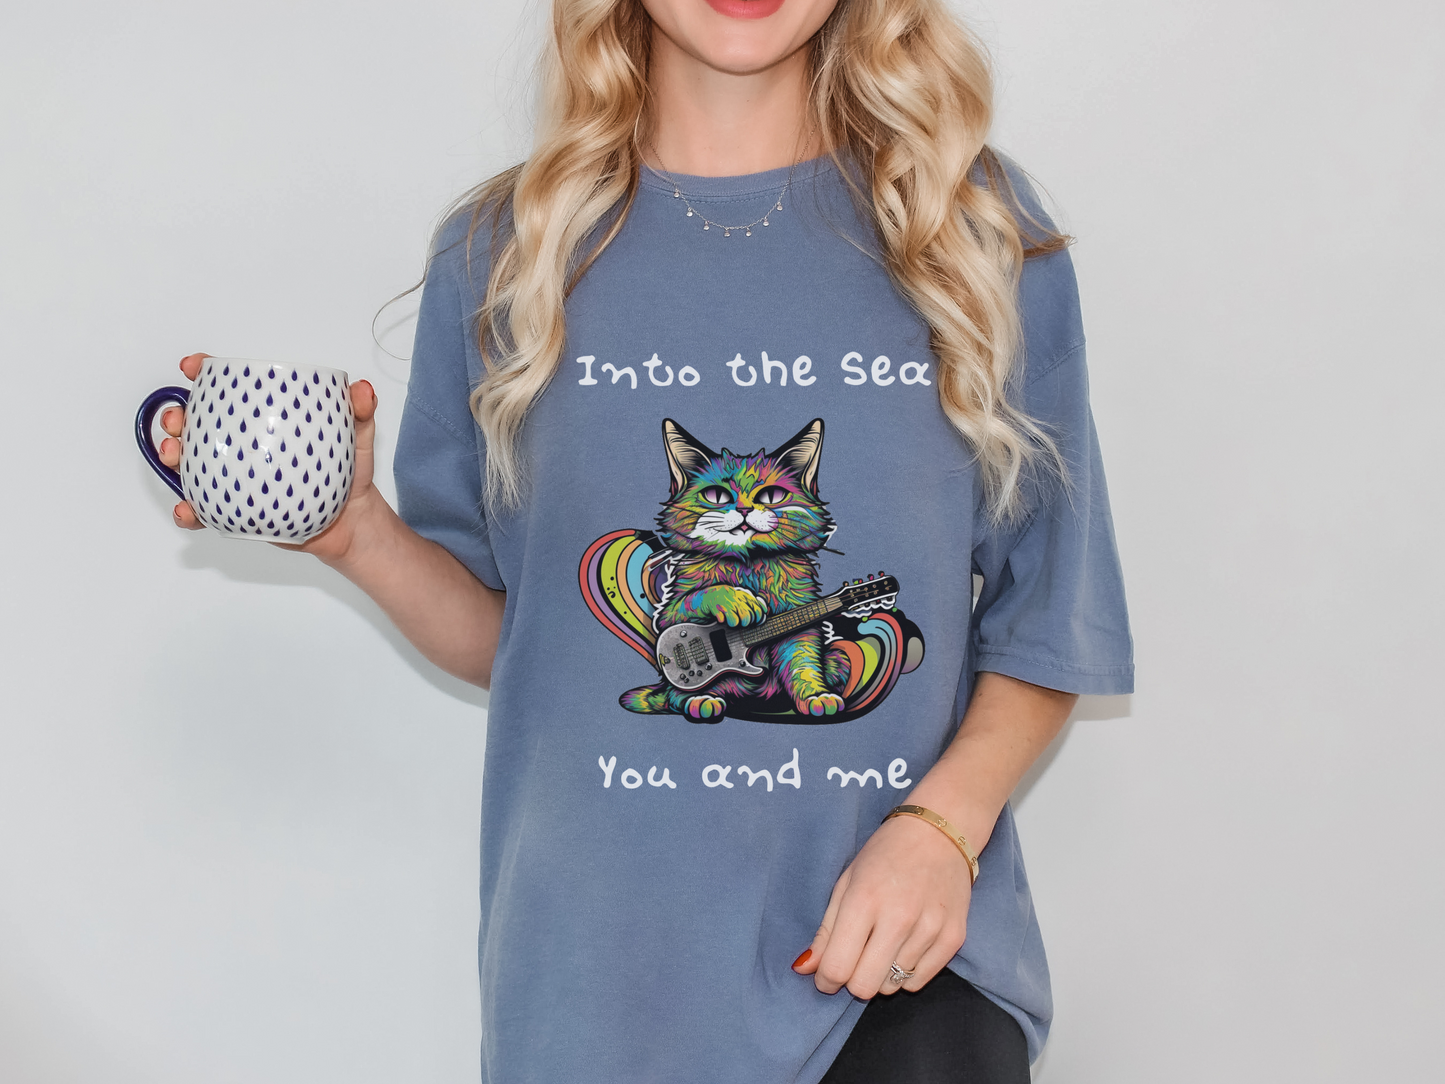 The Cure "Lovecats" T-Shirt in Blue Jean